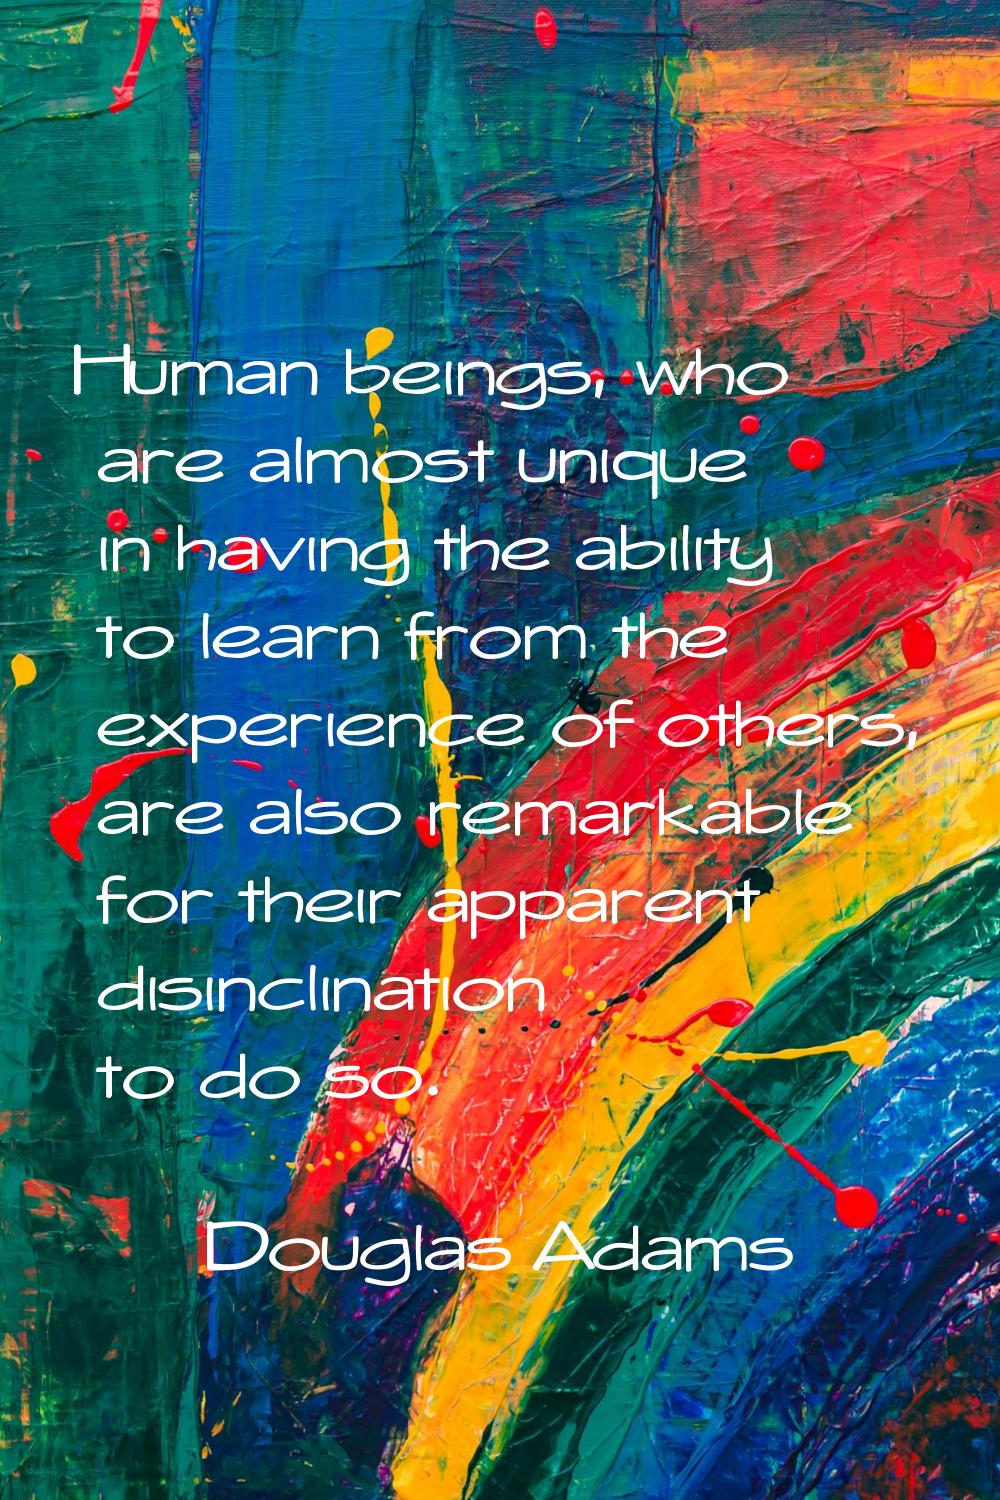 Human beings, who are almost unique in having the ability to learn from the experience of others, a